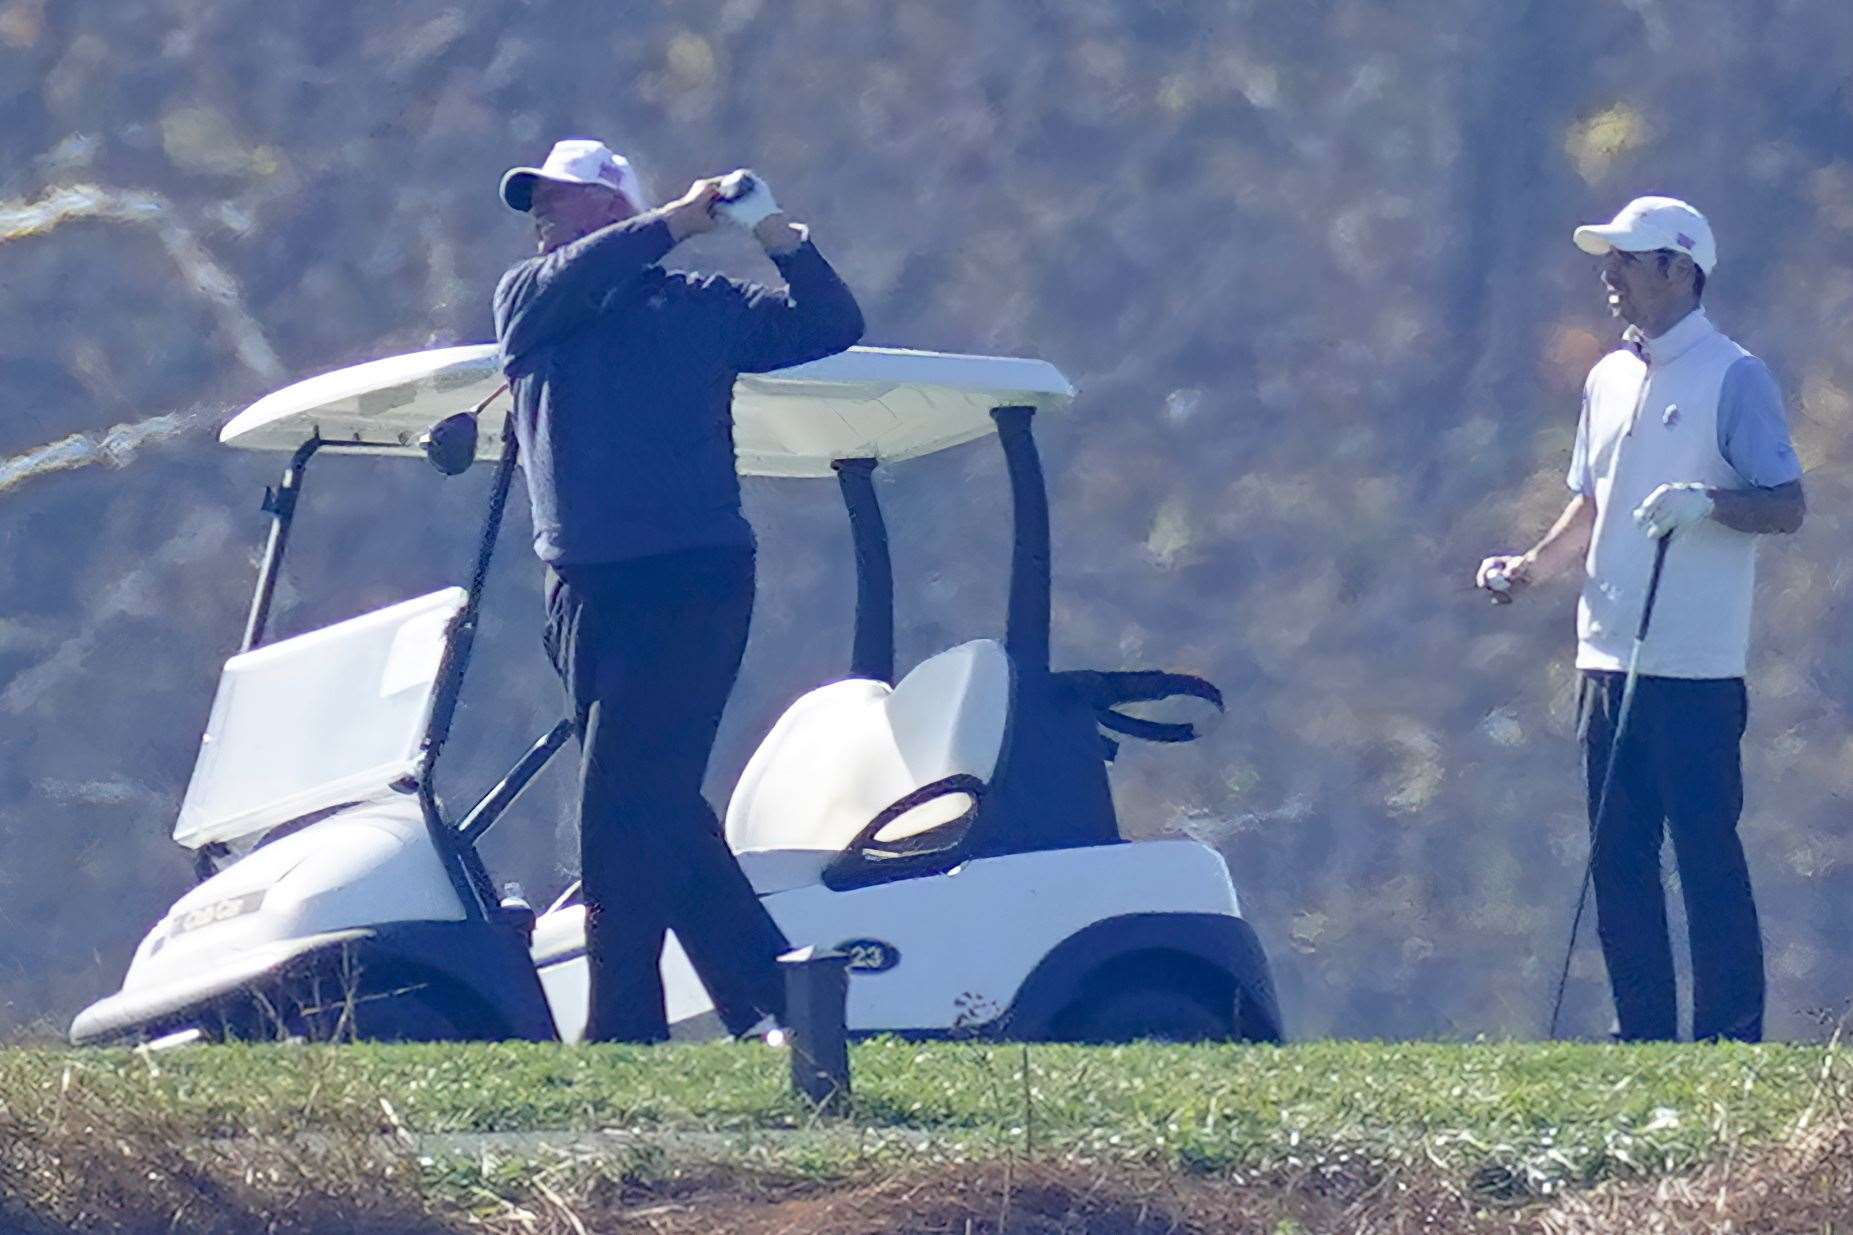 President Donald Trump plays a round of Golf at the Trump National Golf Club in Sterling, Virginia (Steve Helber/AP)